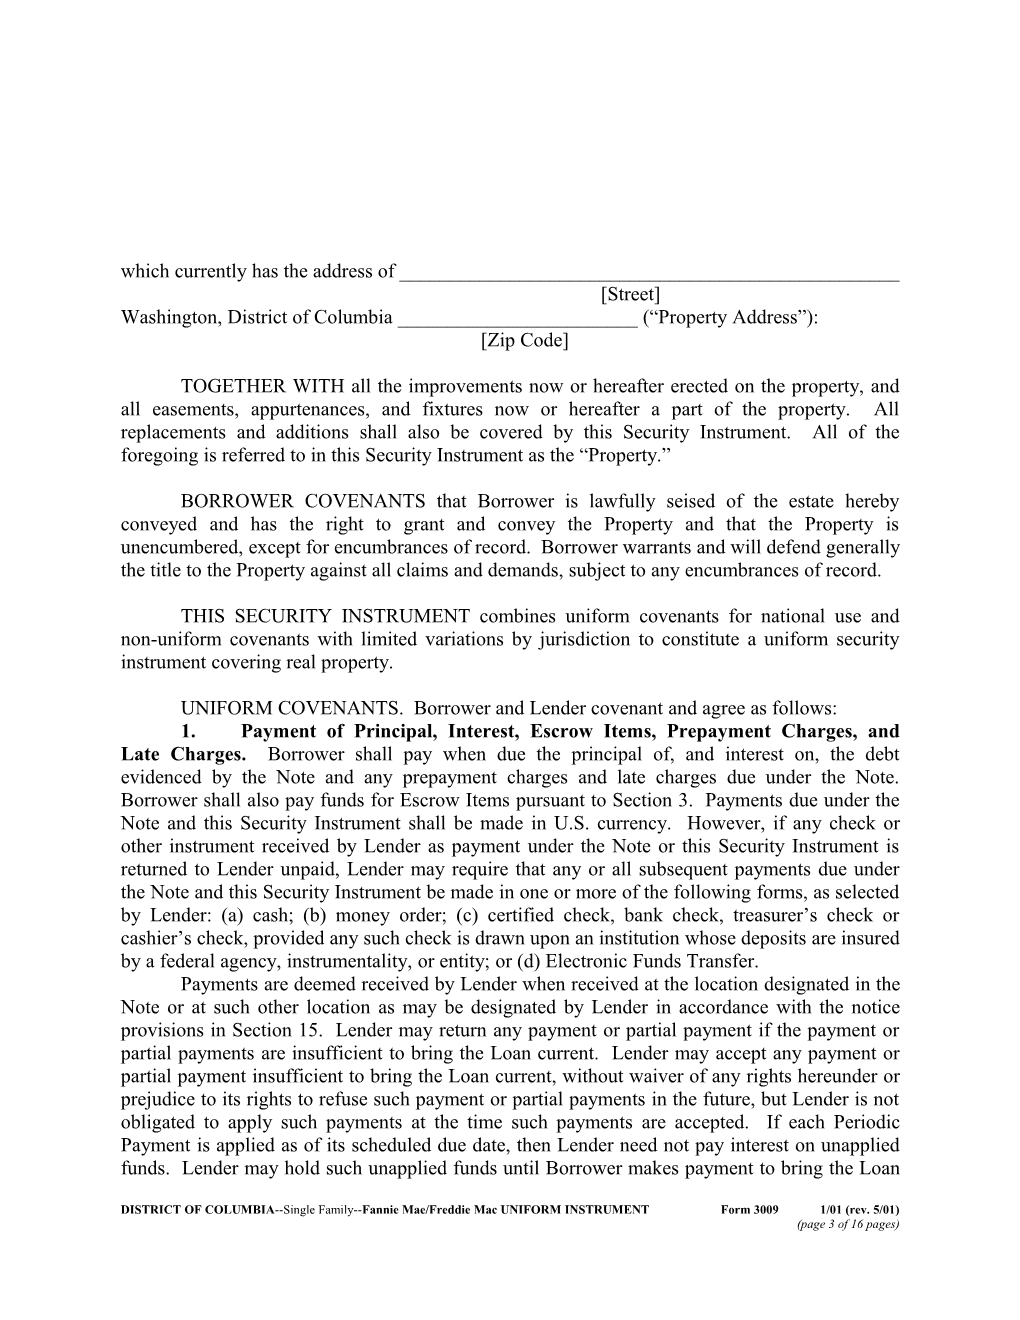 District of Columbia Deed of Trust